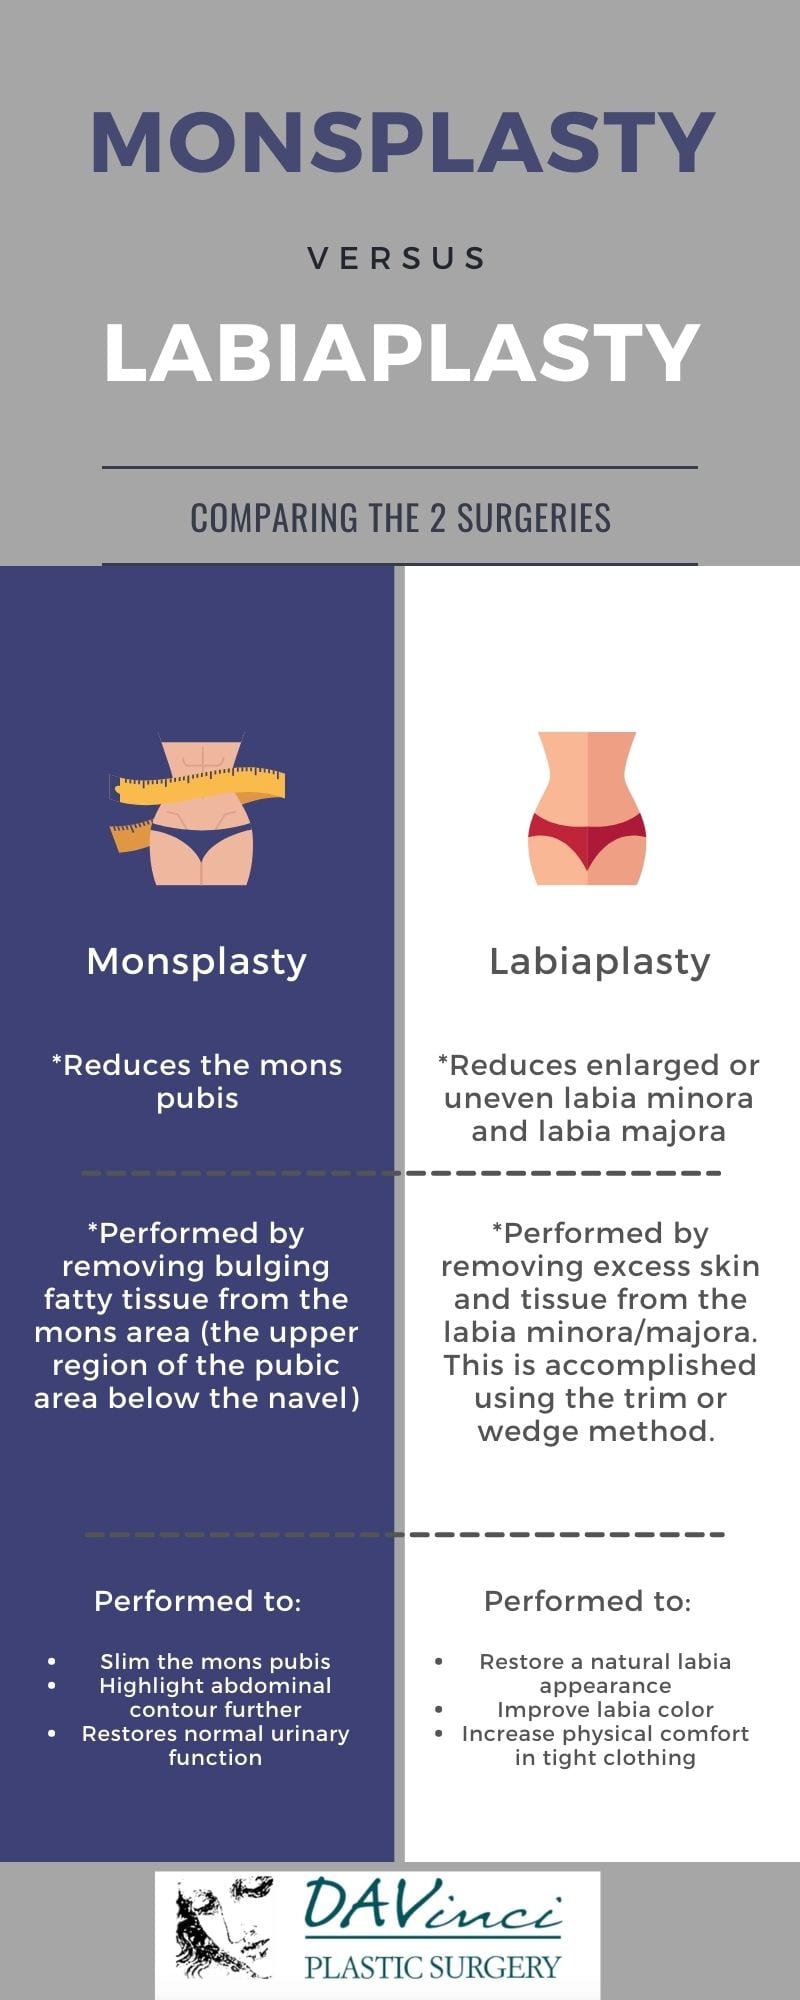 Monsplasty Vs. Labiaplasty: What Is the Difference and Who Can